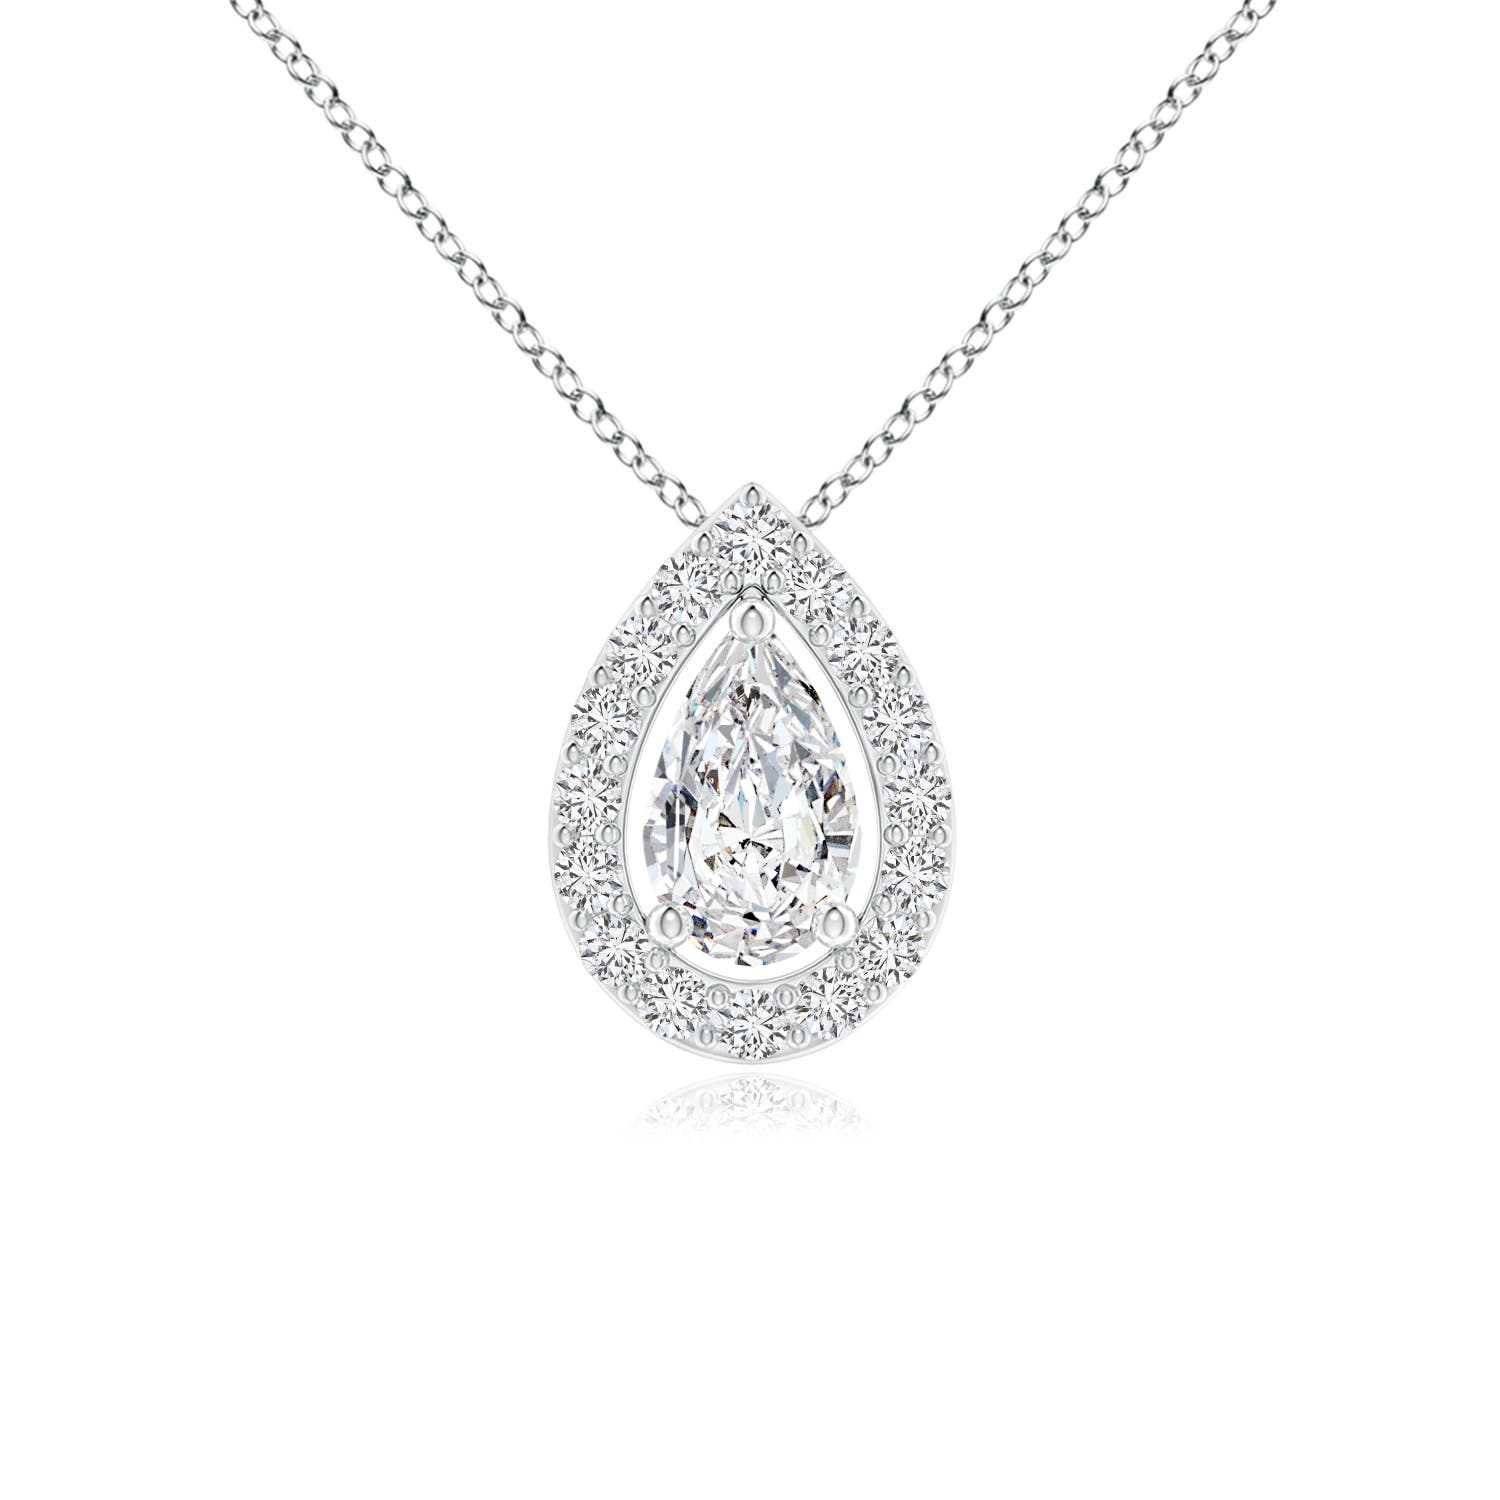 H, SI2 / 0.24 CT / 14 KT White Gold